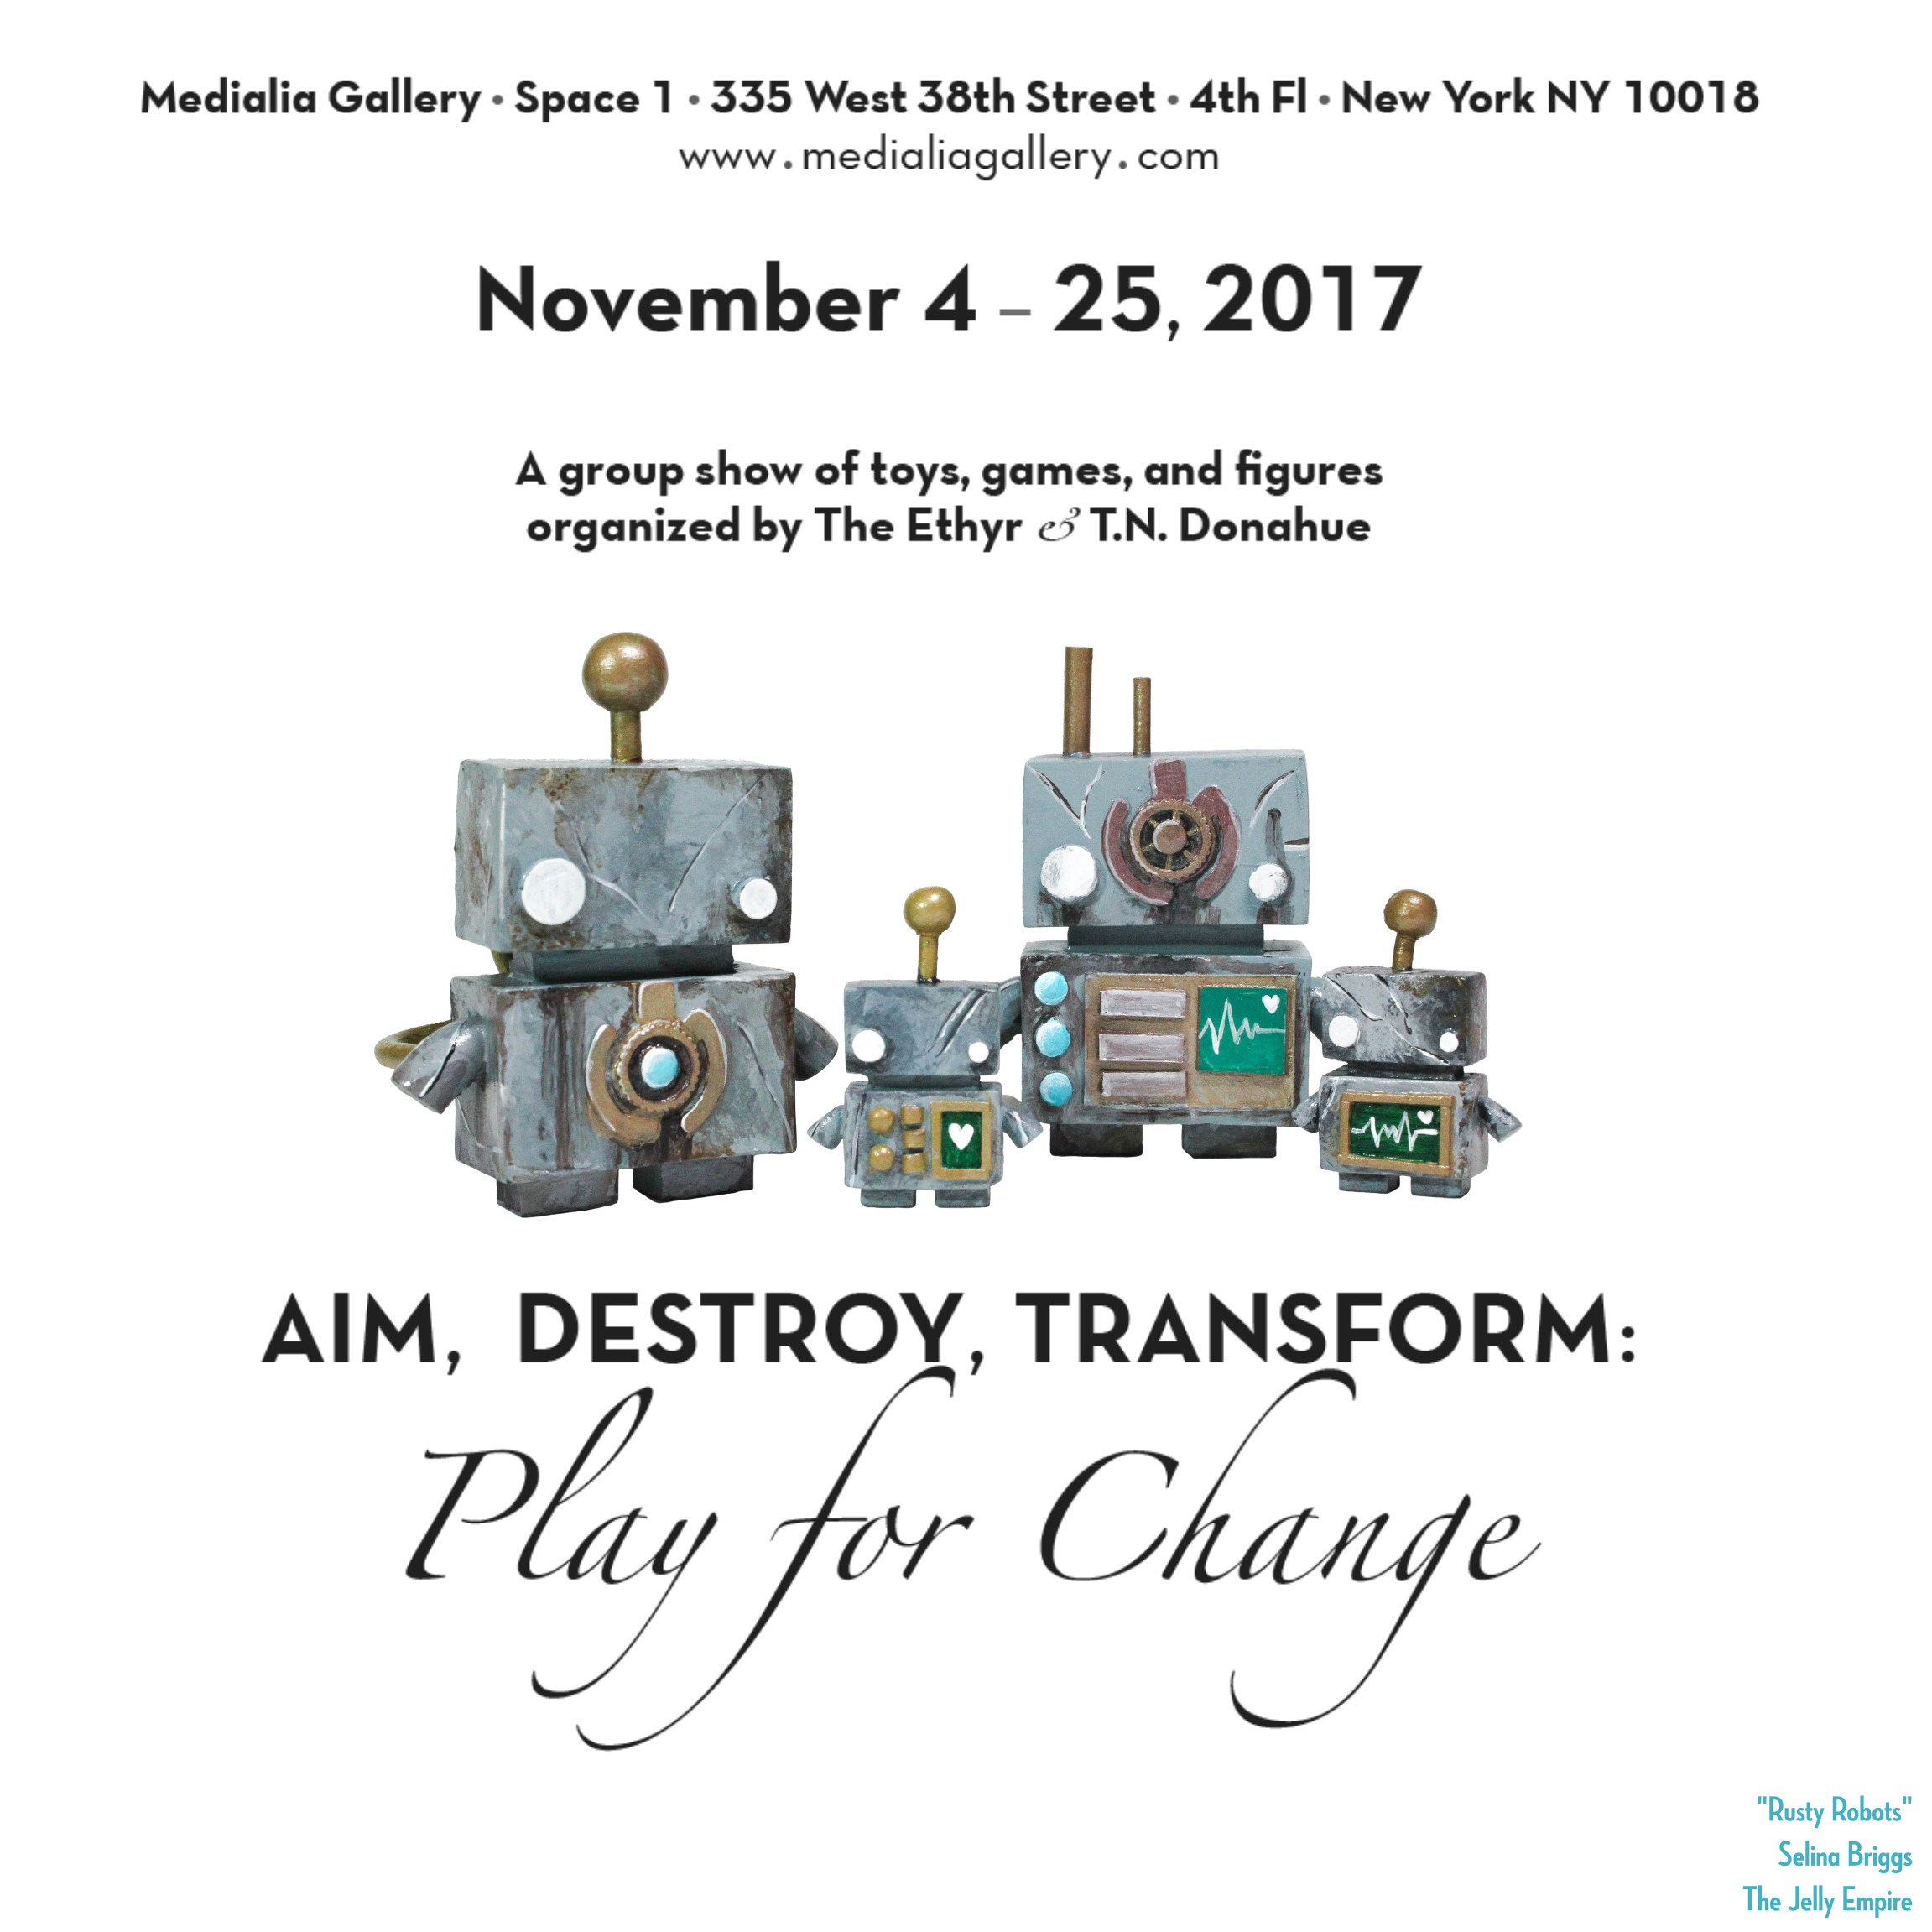 MedialiaGallery_The_Ethyr_AimDestroyTransform_Toy_Show_announcement_The_Jelly_Empire_Robots_Selina_Briggs_November_2017.jpg.png